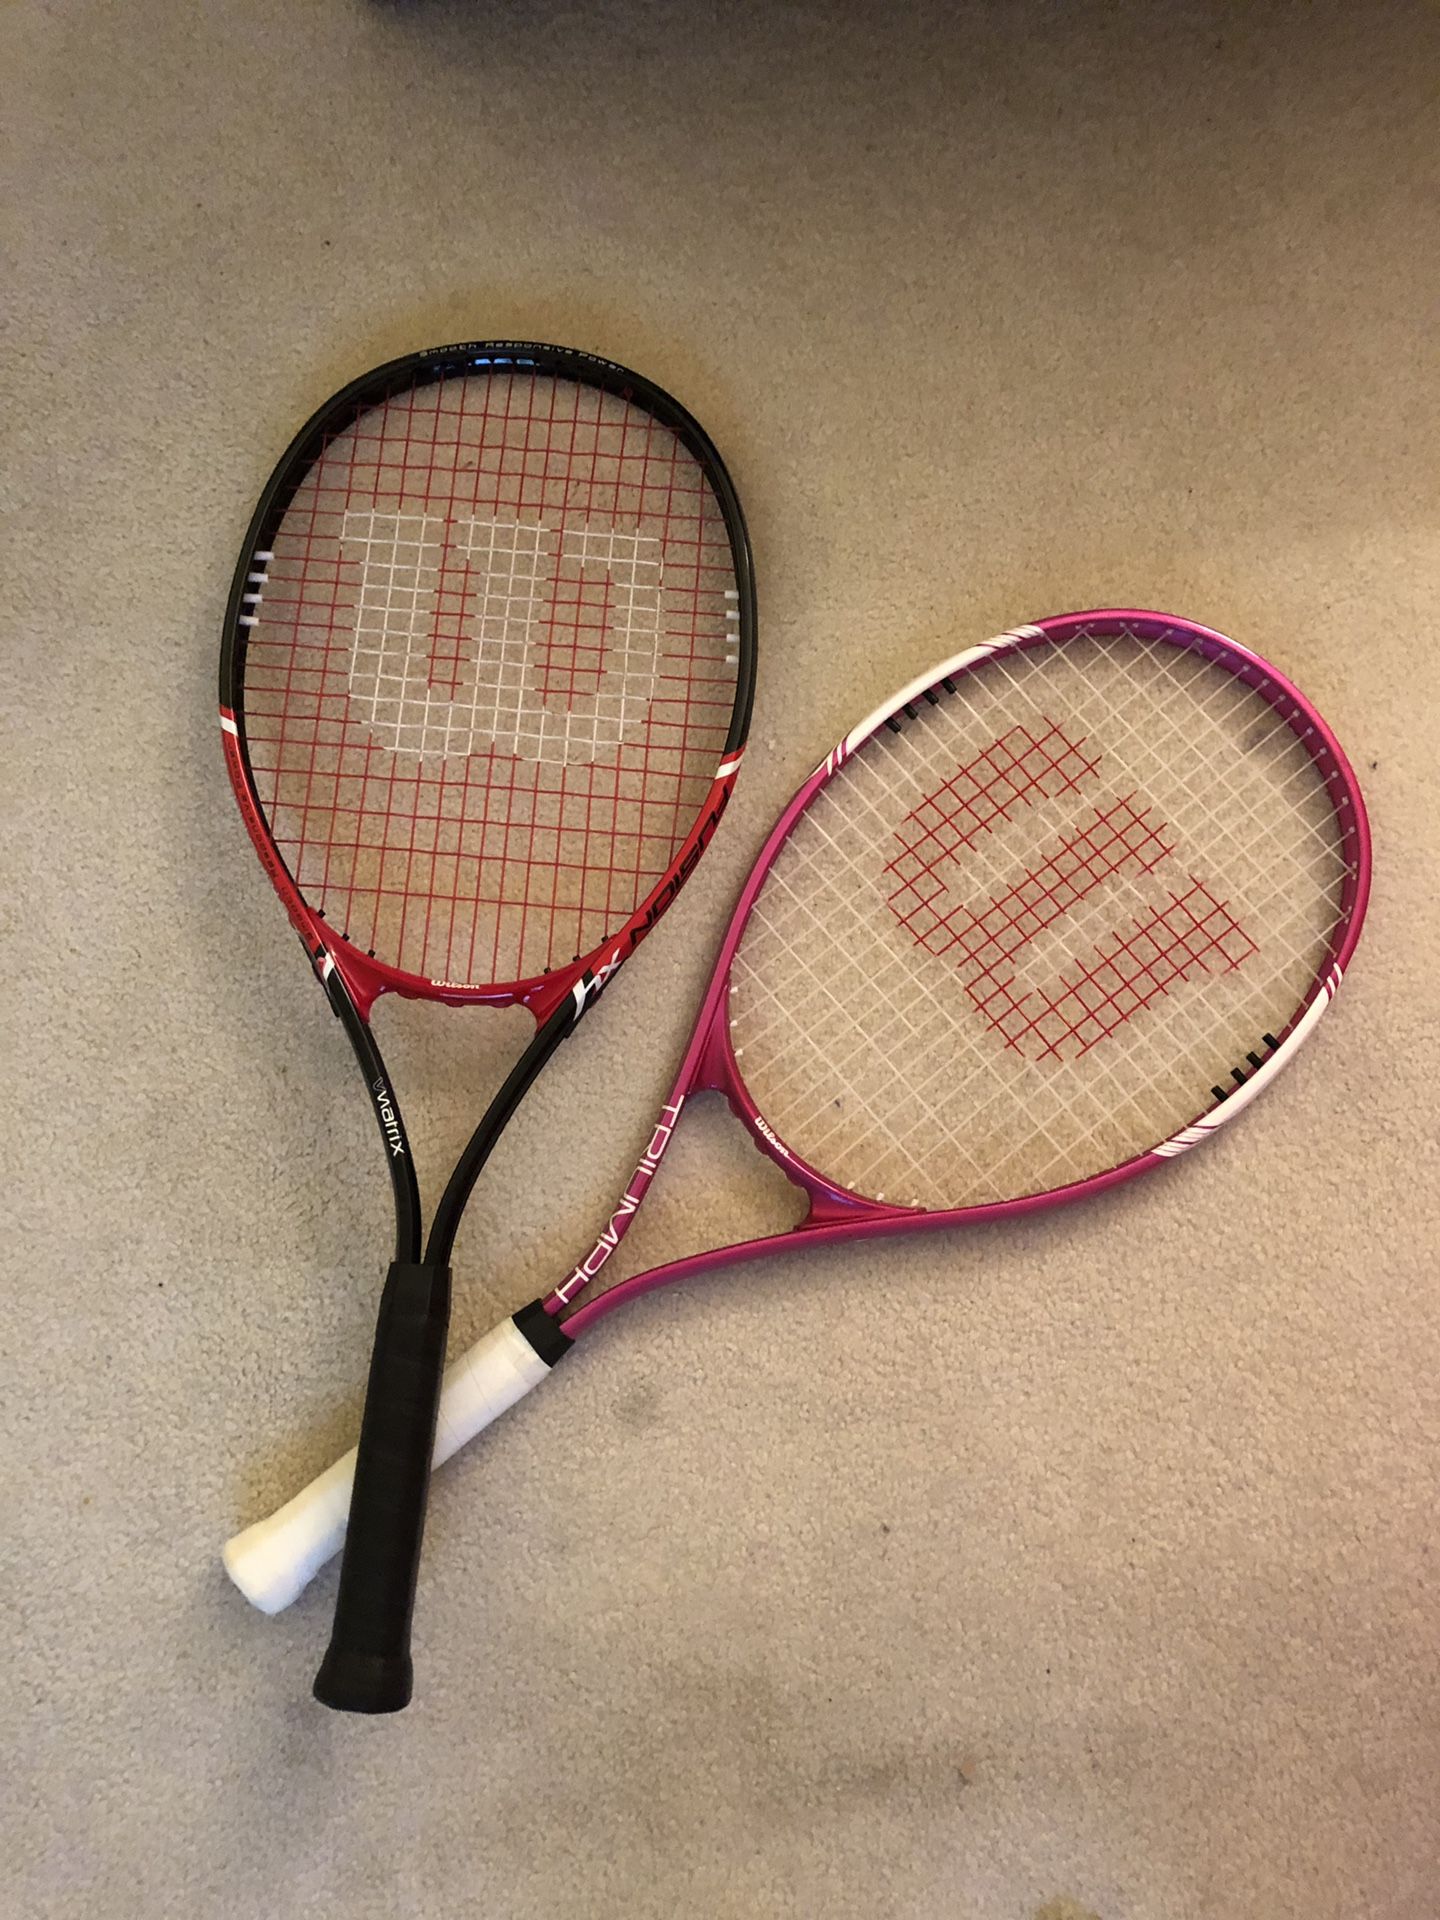 Two tennis rackets